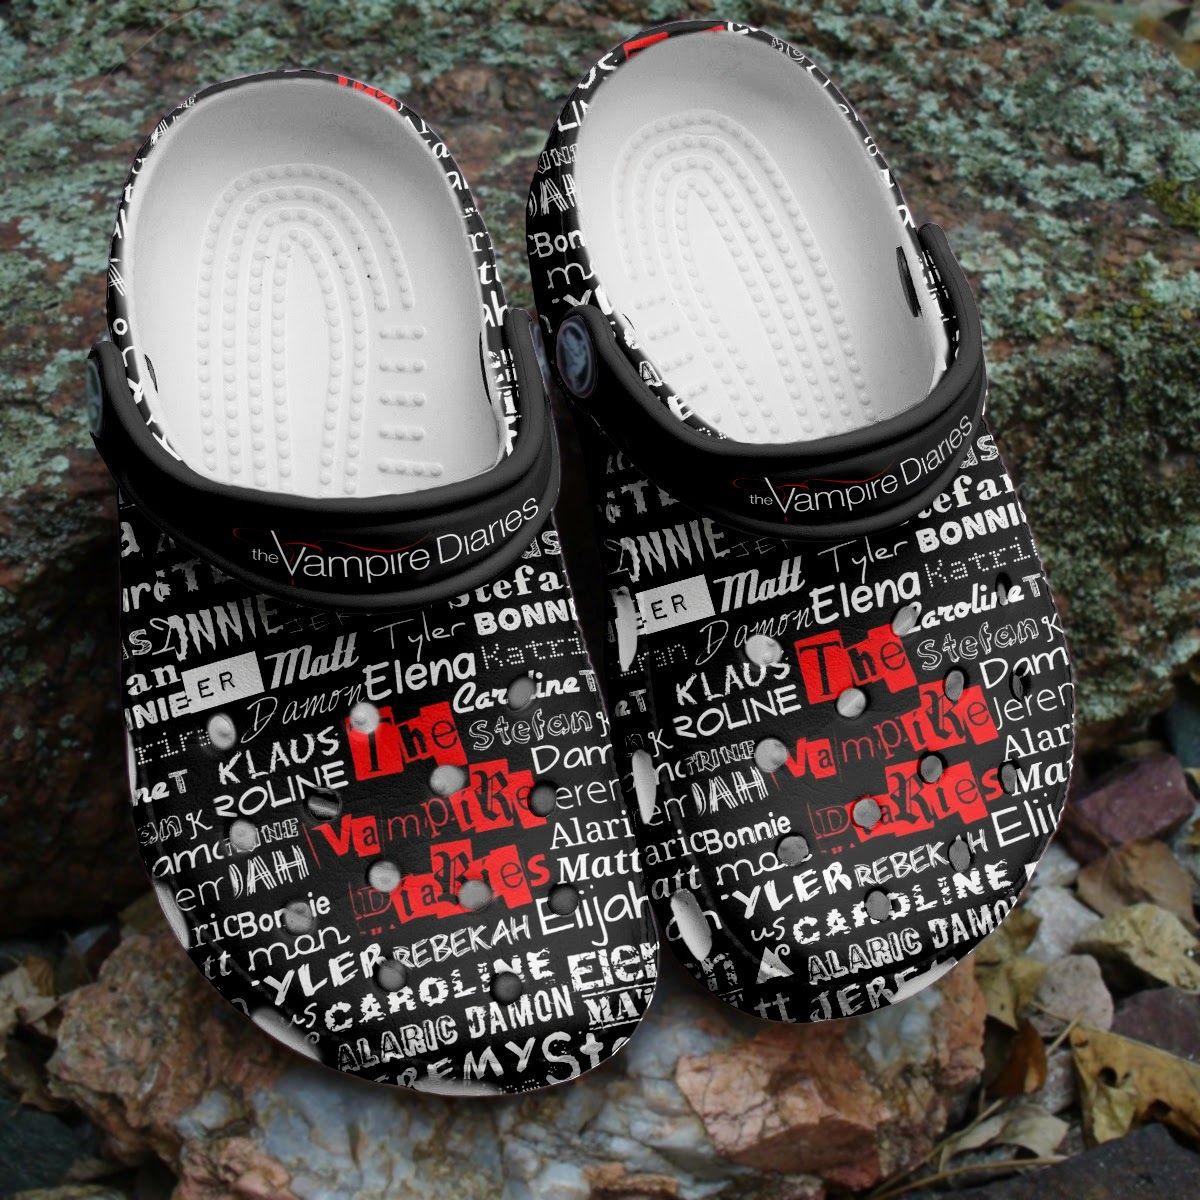 If you'd like to purchase a pair of Crocband Clogs, be sure to check out the official website. 167